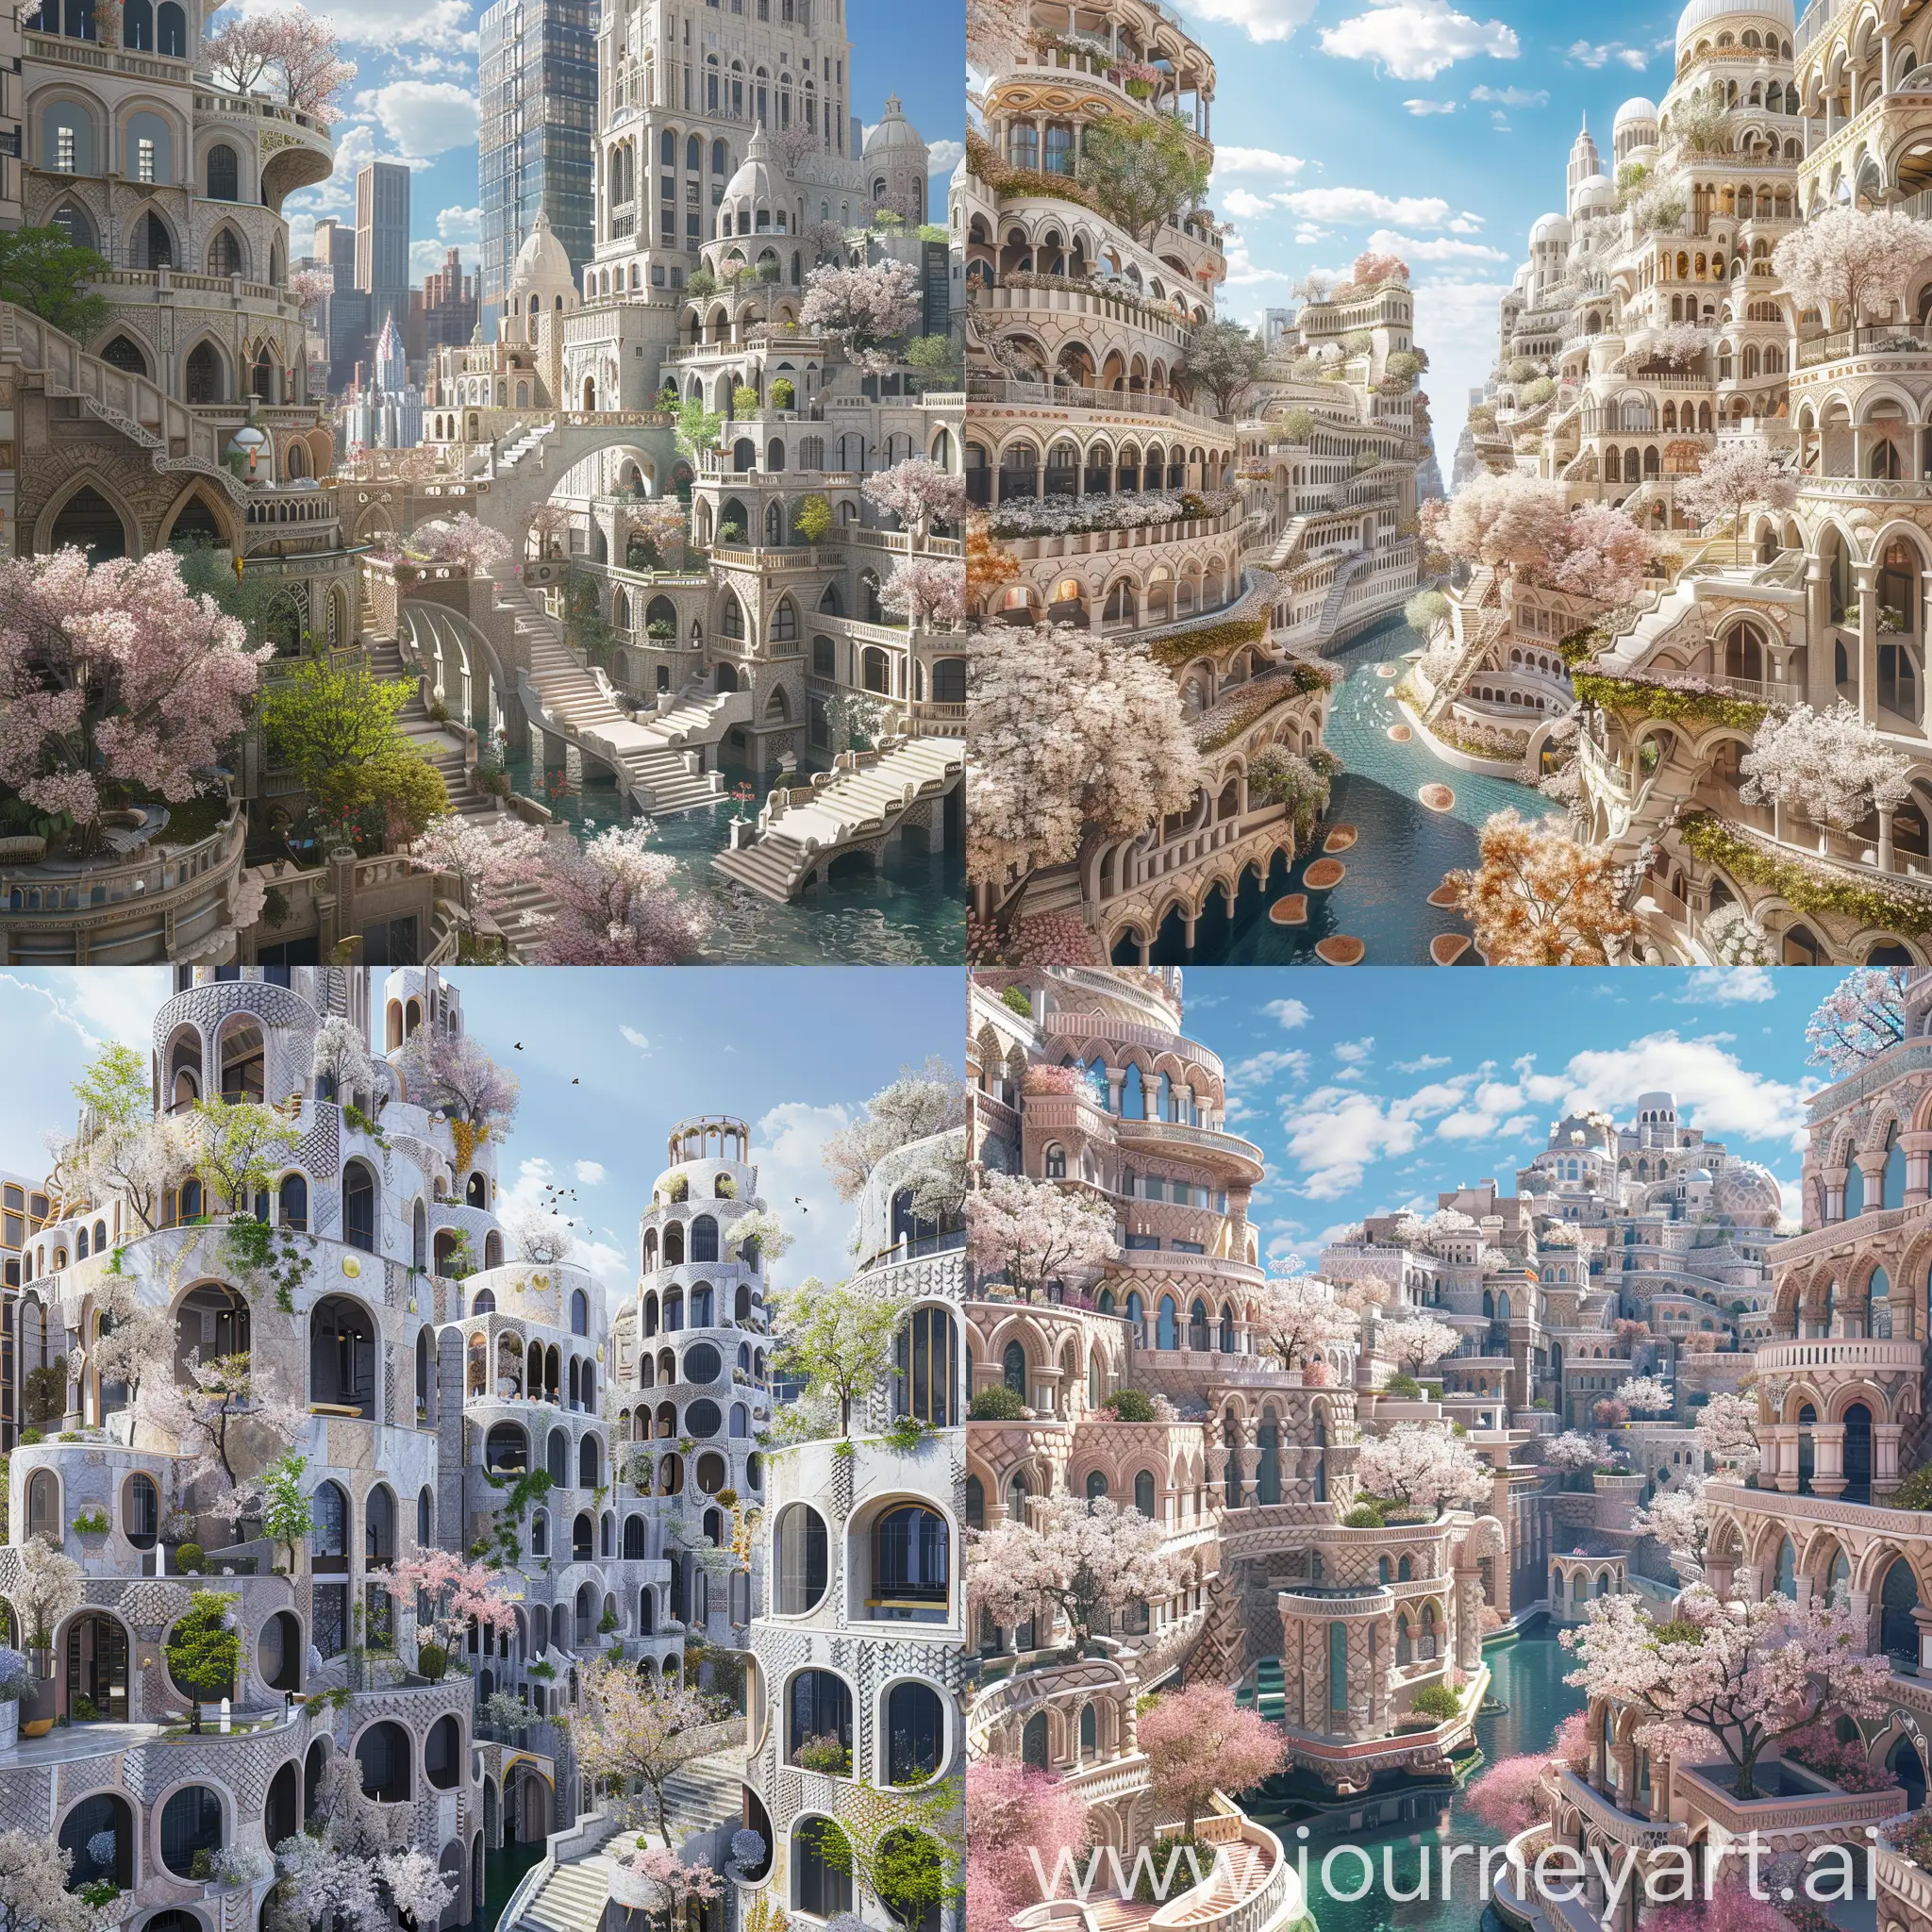 Beautiful futuristic metropolis in an alternate timeline where all buildings retain traditional elements, ornate travertine architecture with scale-like patterns on facades and blossoming trees, monumental terraced buildings, canals, New York City vibe, spring, blue sky, photograph